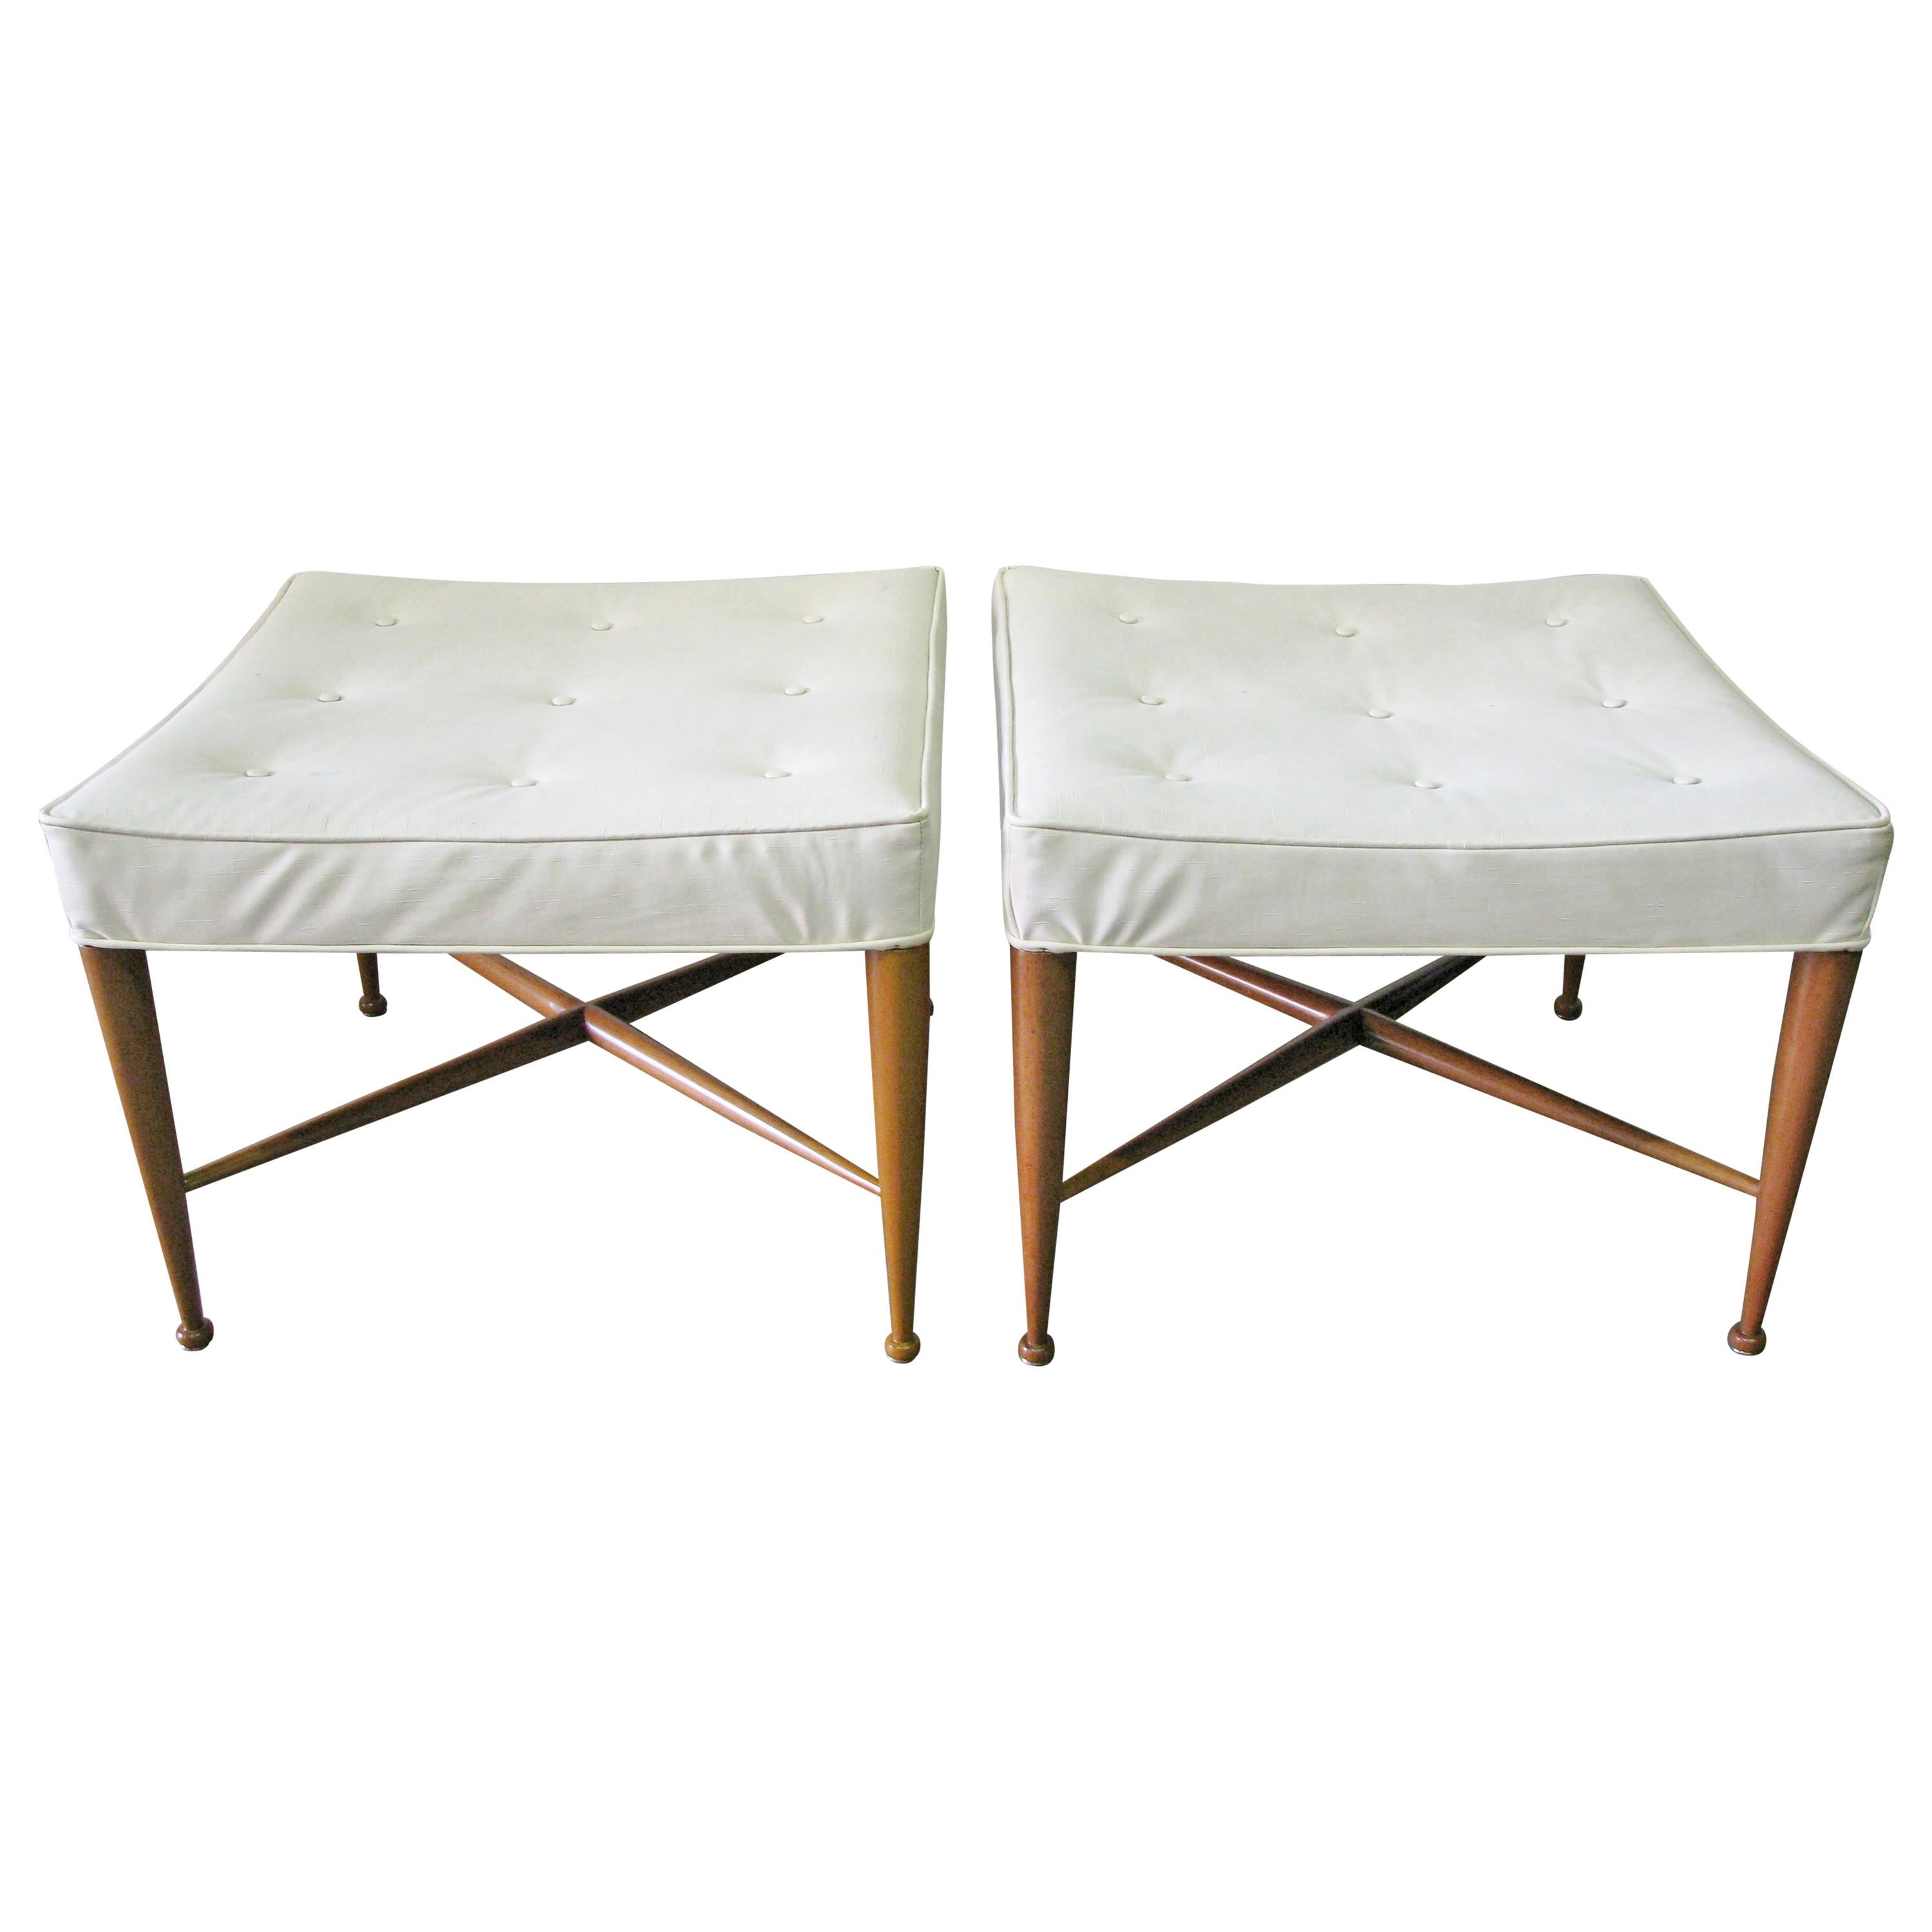 Pair of 1950s Edward Wormley for Dunbar "Thebes" Stools, Original Upholstery im Angebot